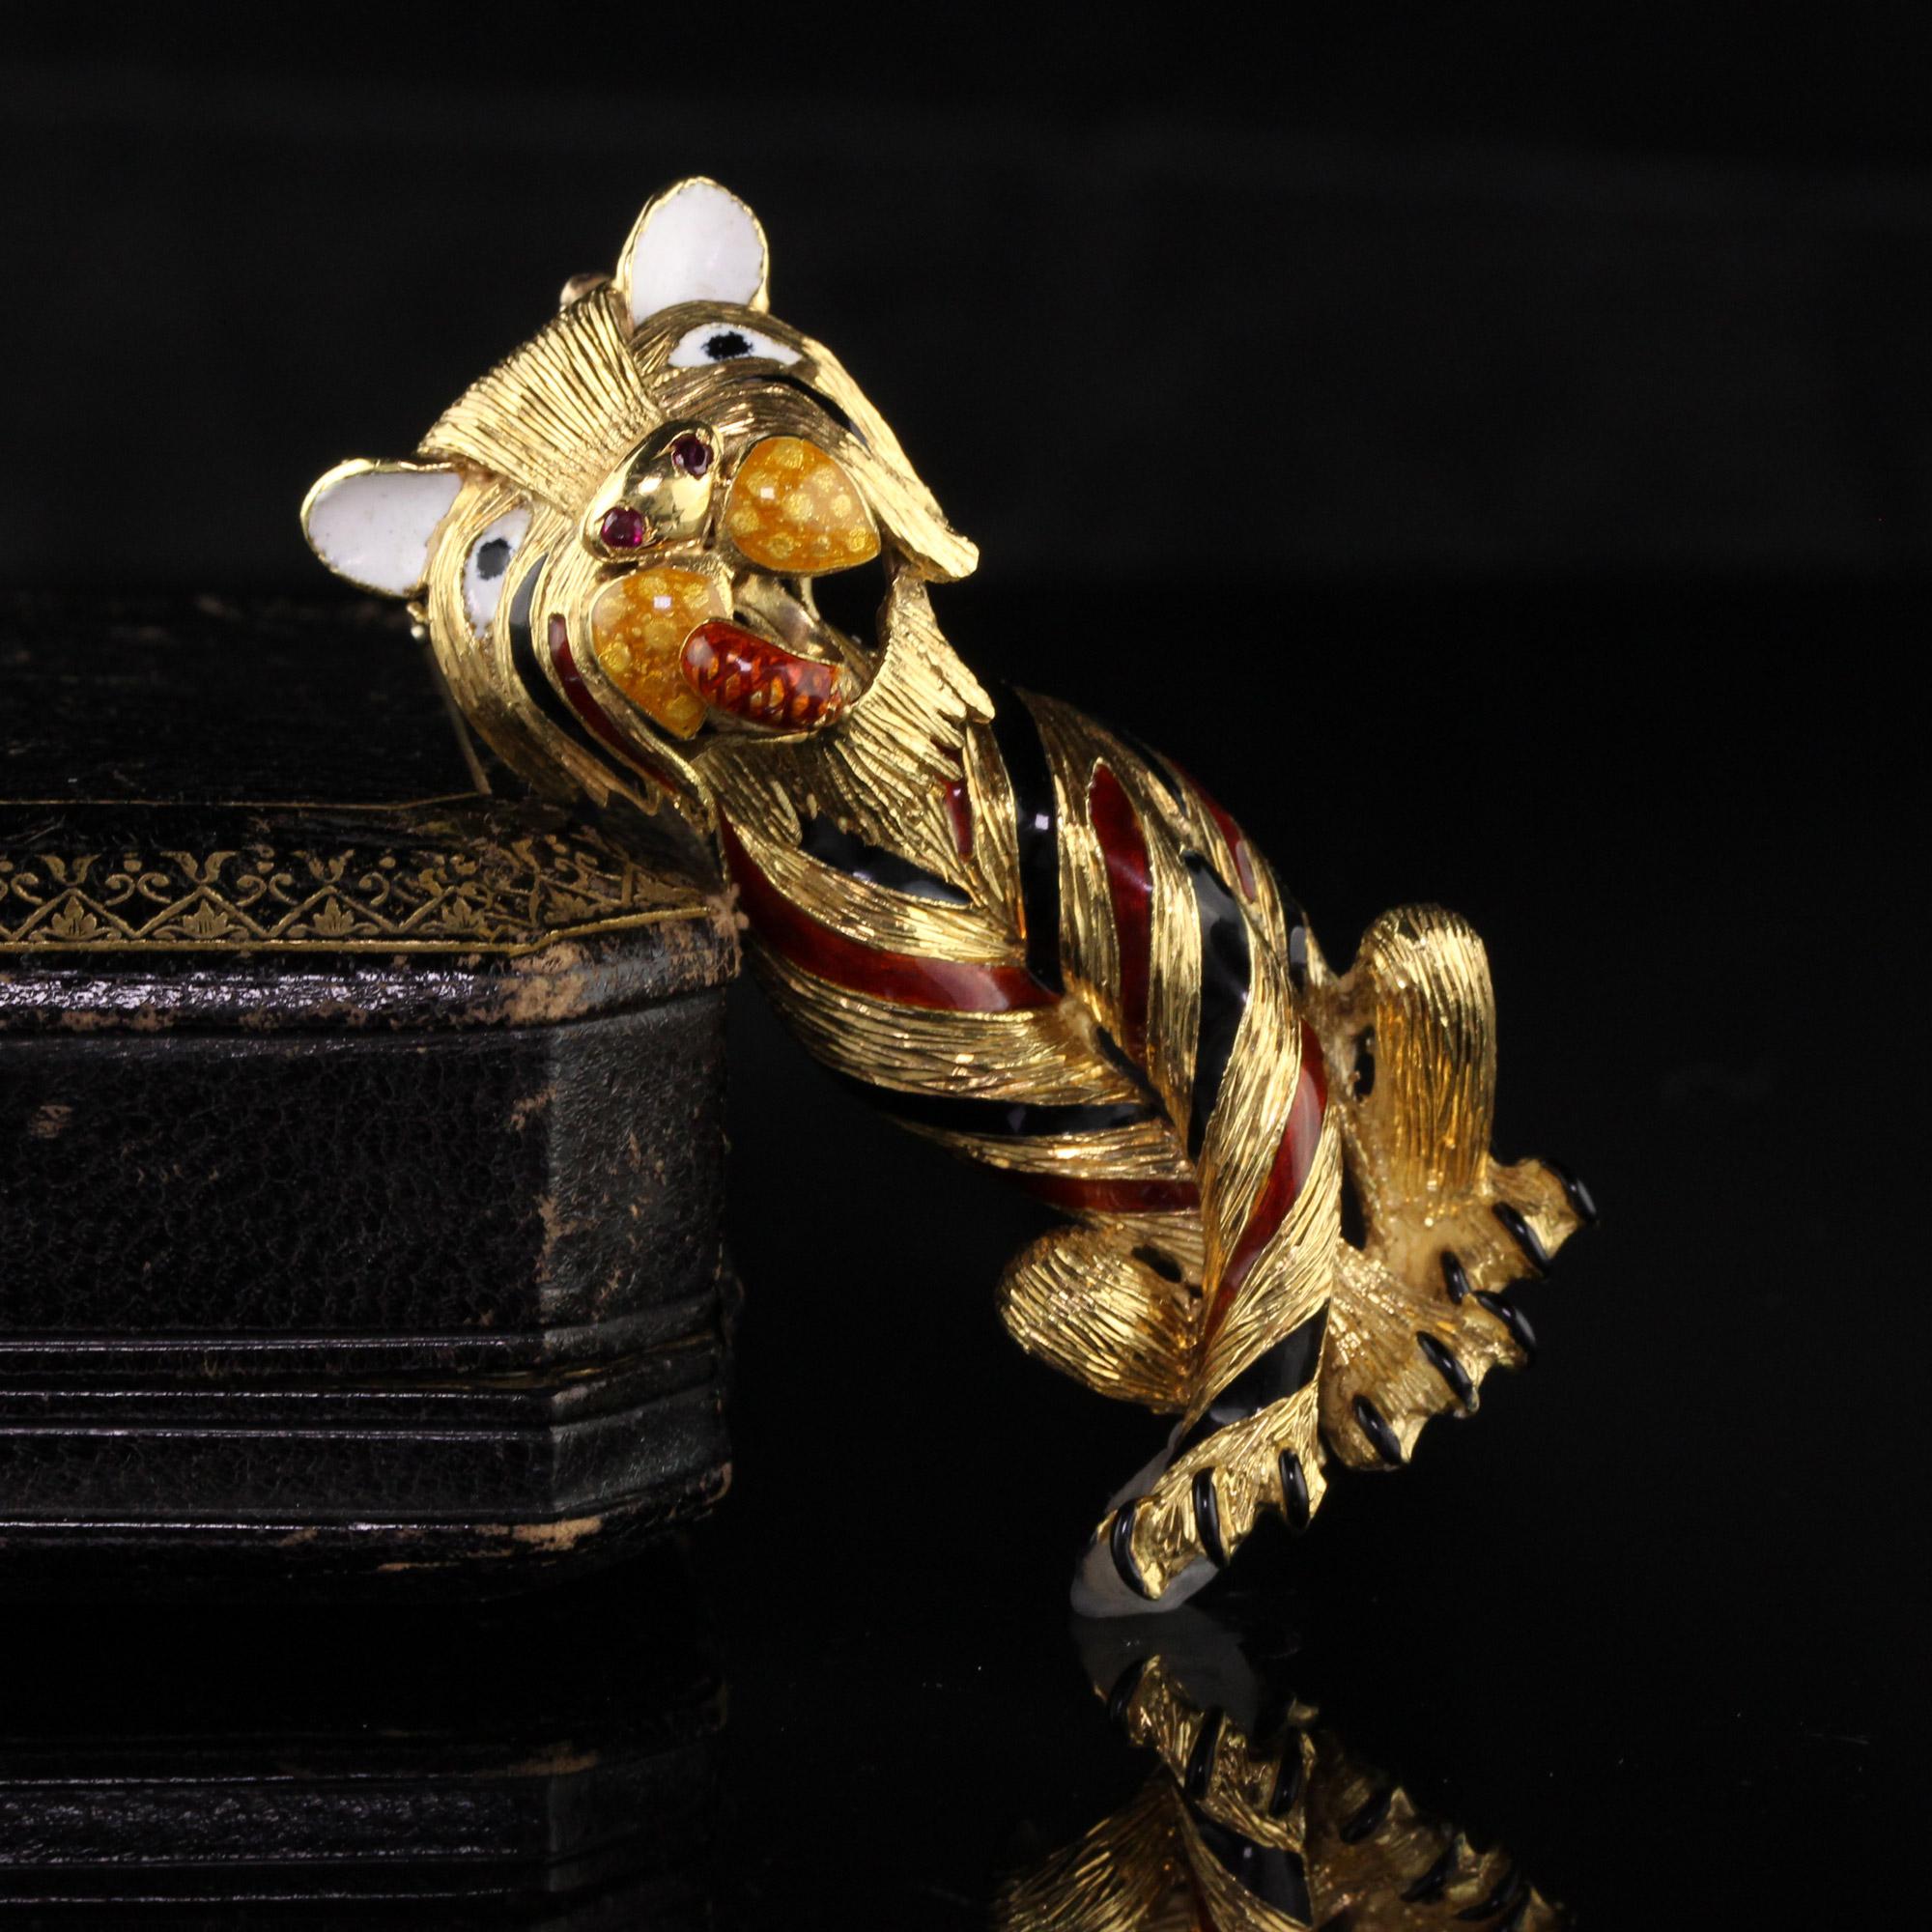 Beautiful retro tiger pin and pendant with 2 rubies as the tiger's nostrils. The enamel is in great condition.

Item #P0091

Metal: 18K Yellow Gold

Weight: 35.5 Grams

Measurements: 2.3 in x 0.9 in 